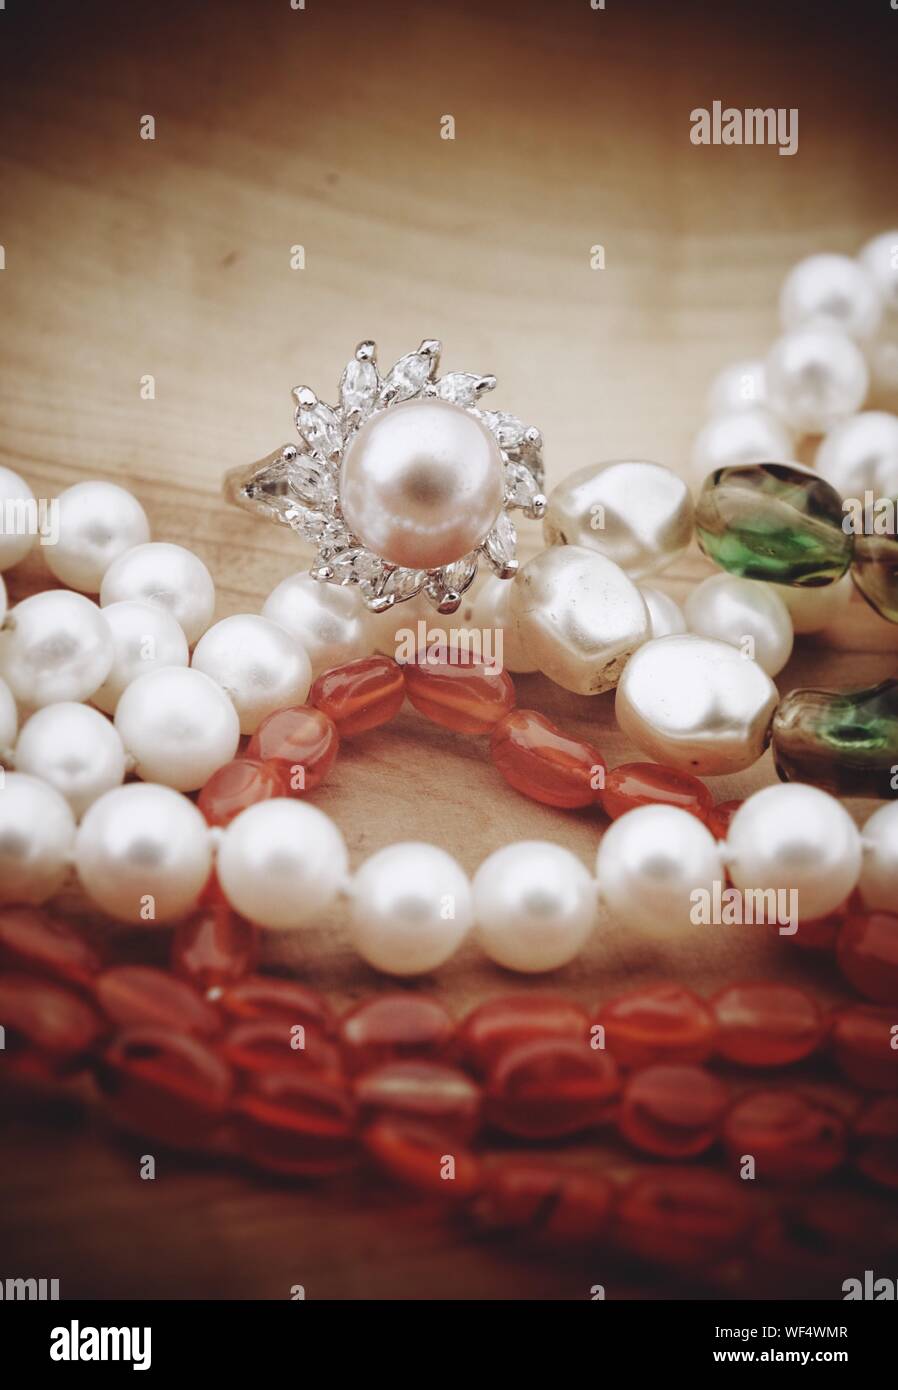 High Angle View Of Pearl Necklace On Table Stock Photo